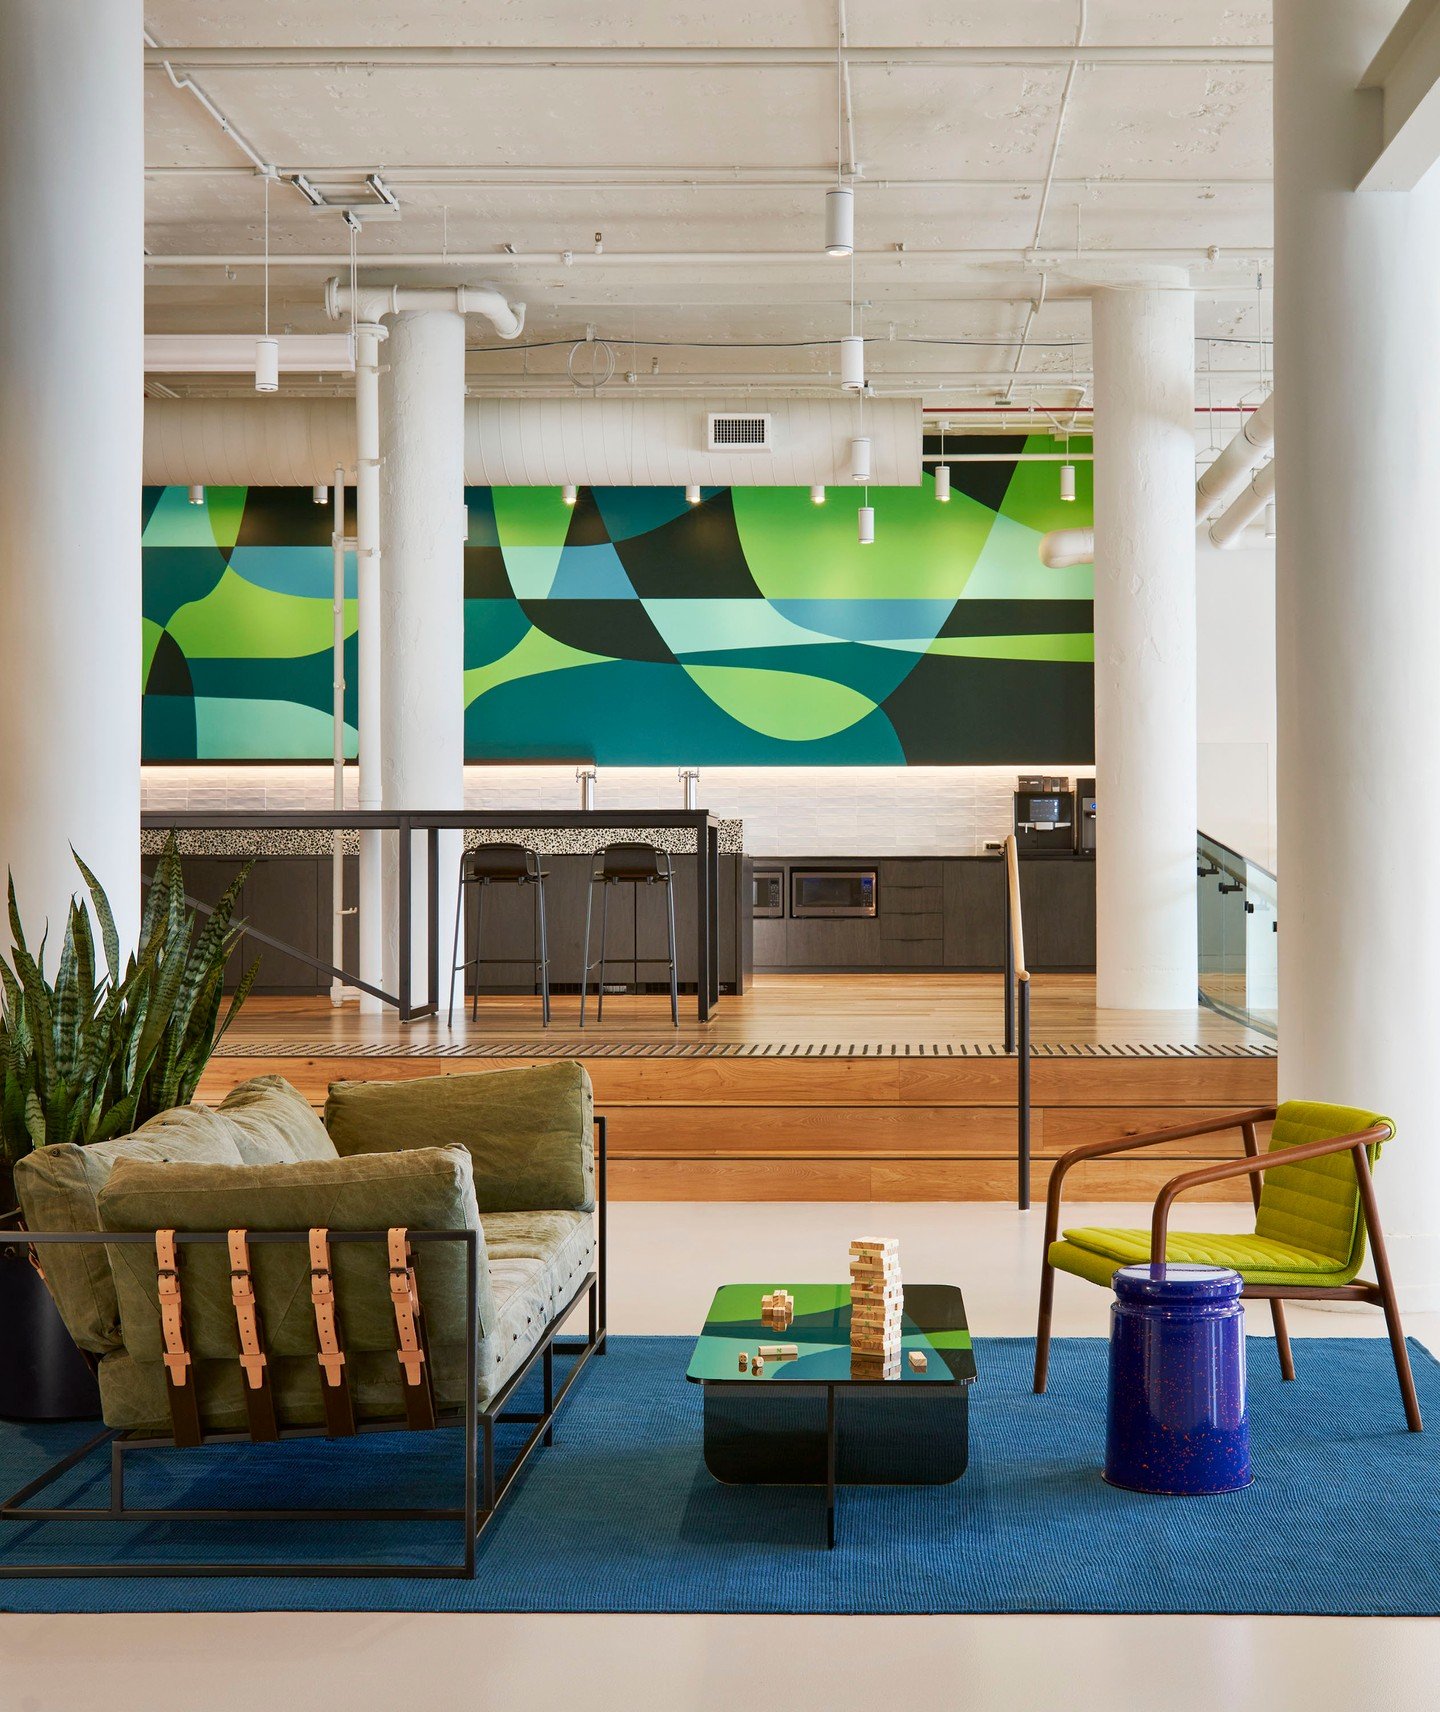 We haven't done a #ThrowbackThursday in a while, so here's one of our favorites, @numeratorone, located at @24eastwashington . Soaring ceiling heights allowed us to create an elevated area in the central cafe space. The mural, created by our friends 